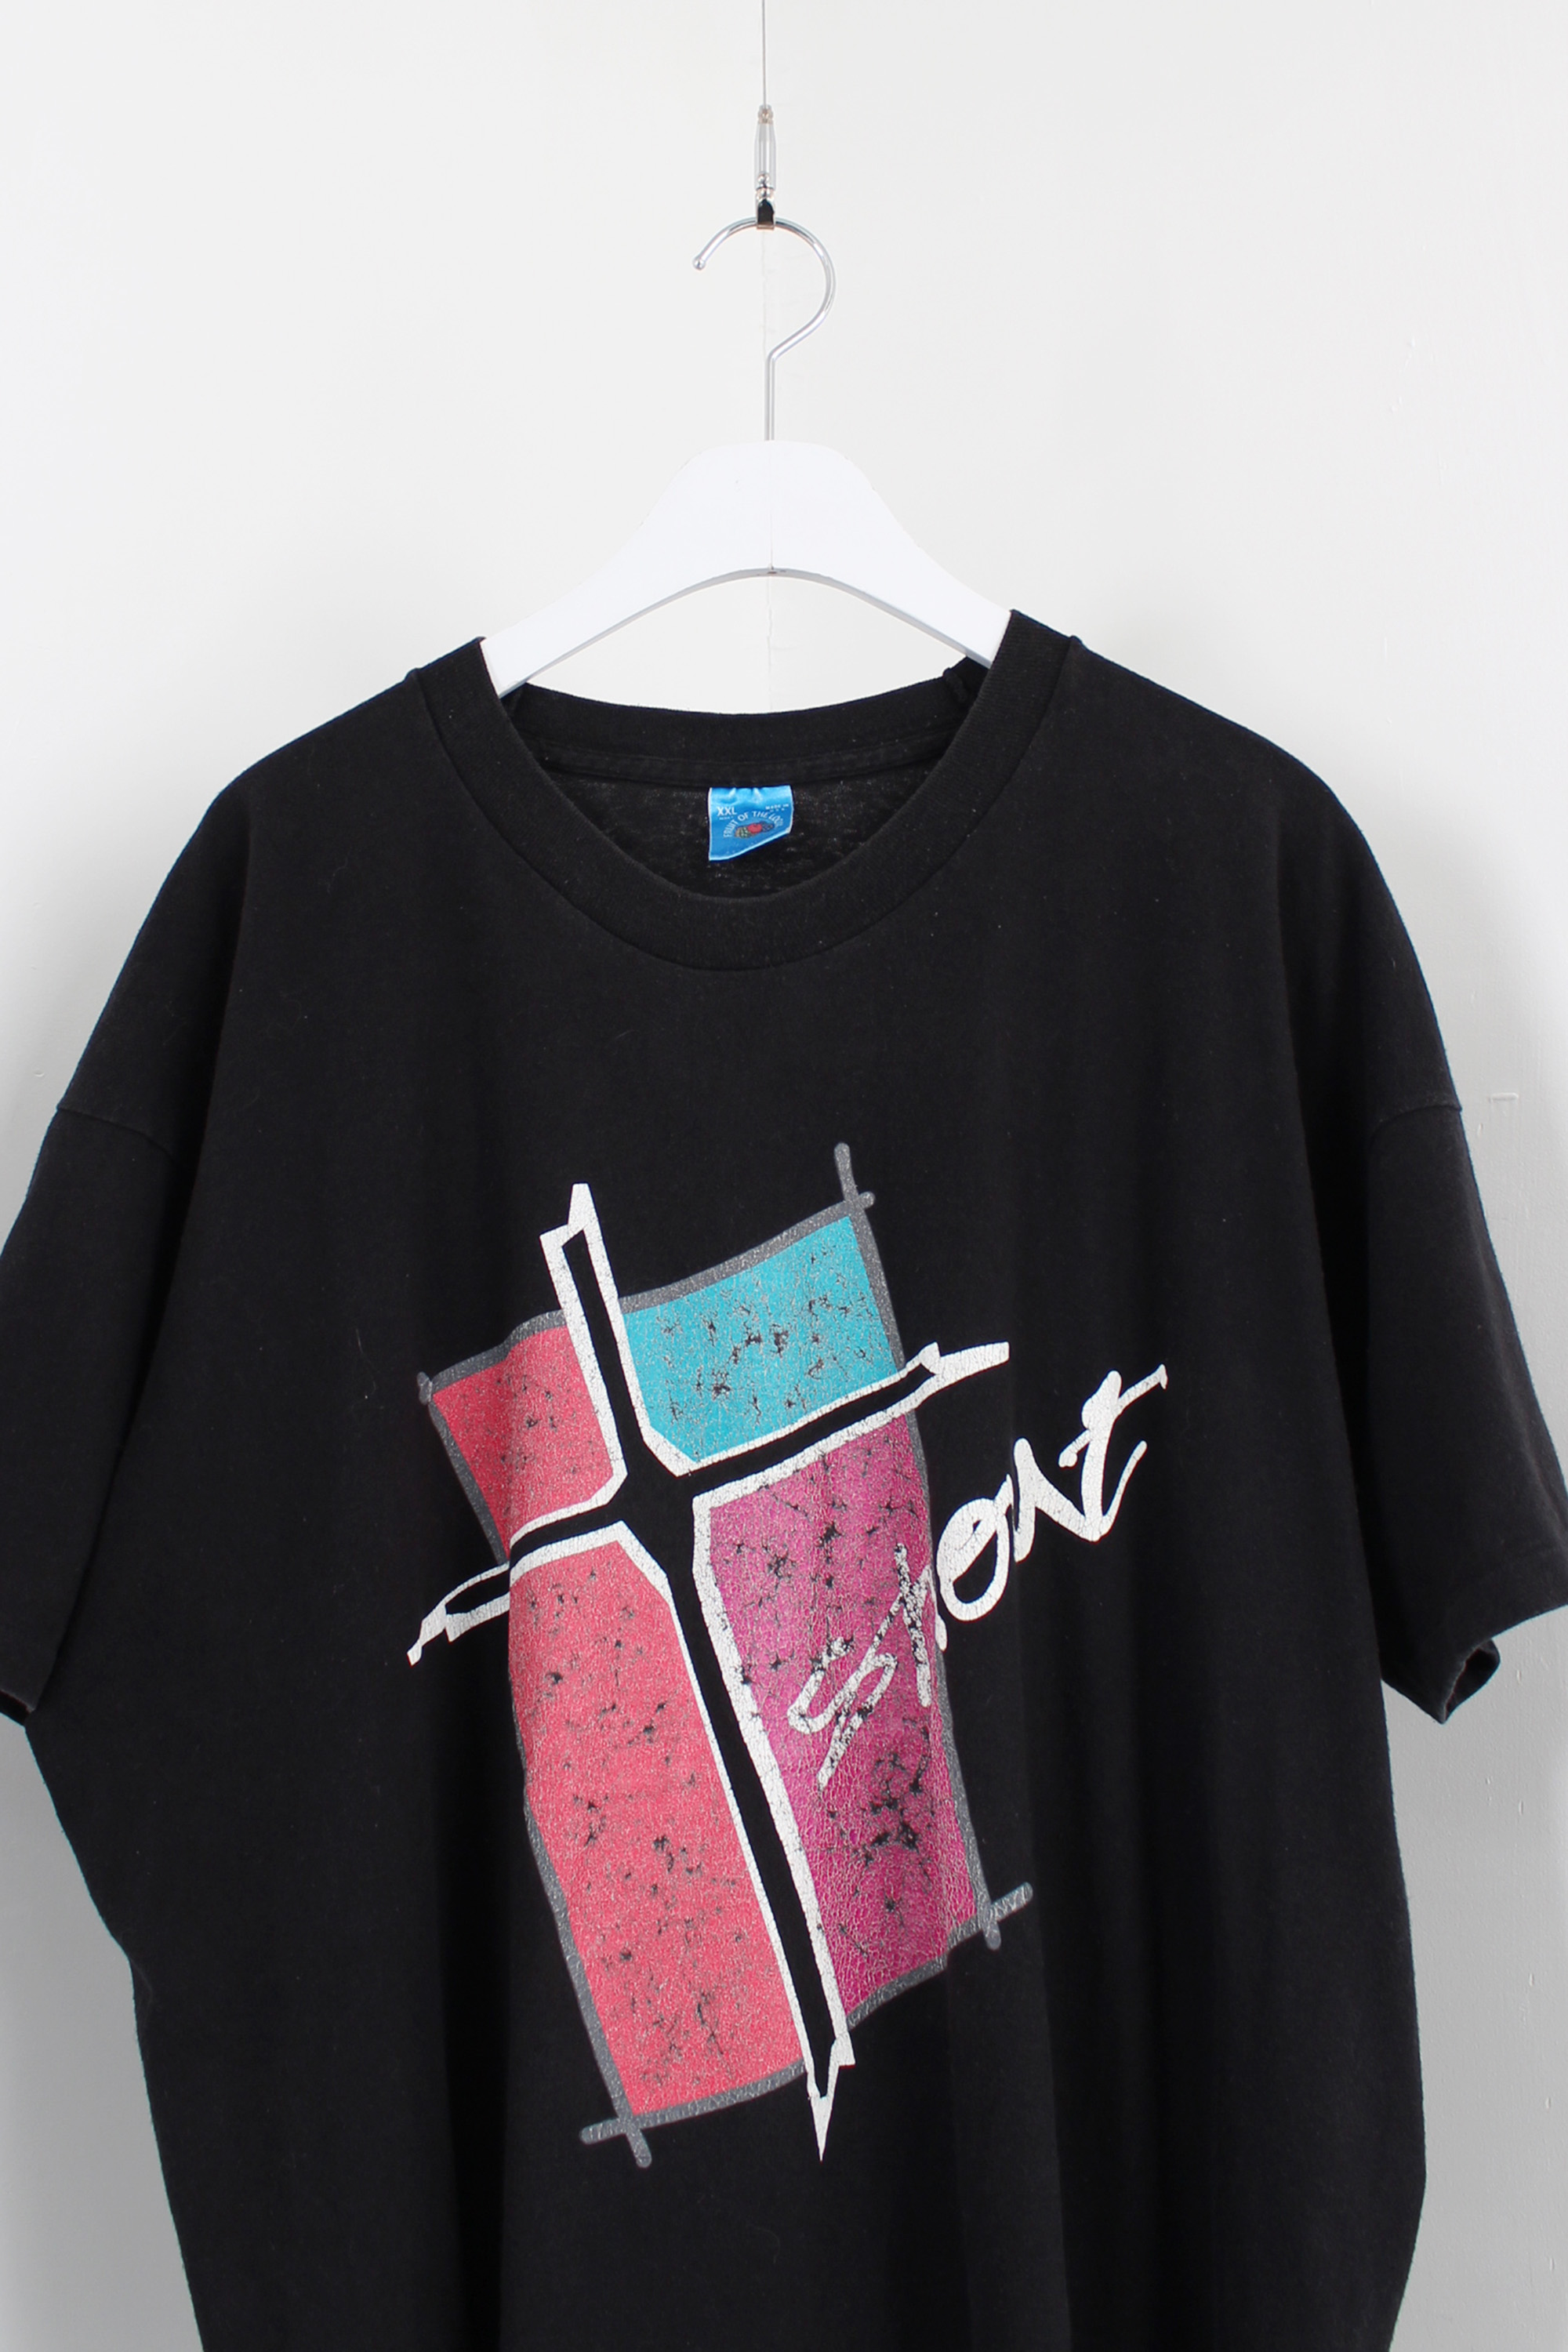 90s FRUIT OF THE LOOM t-shirt